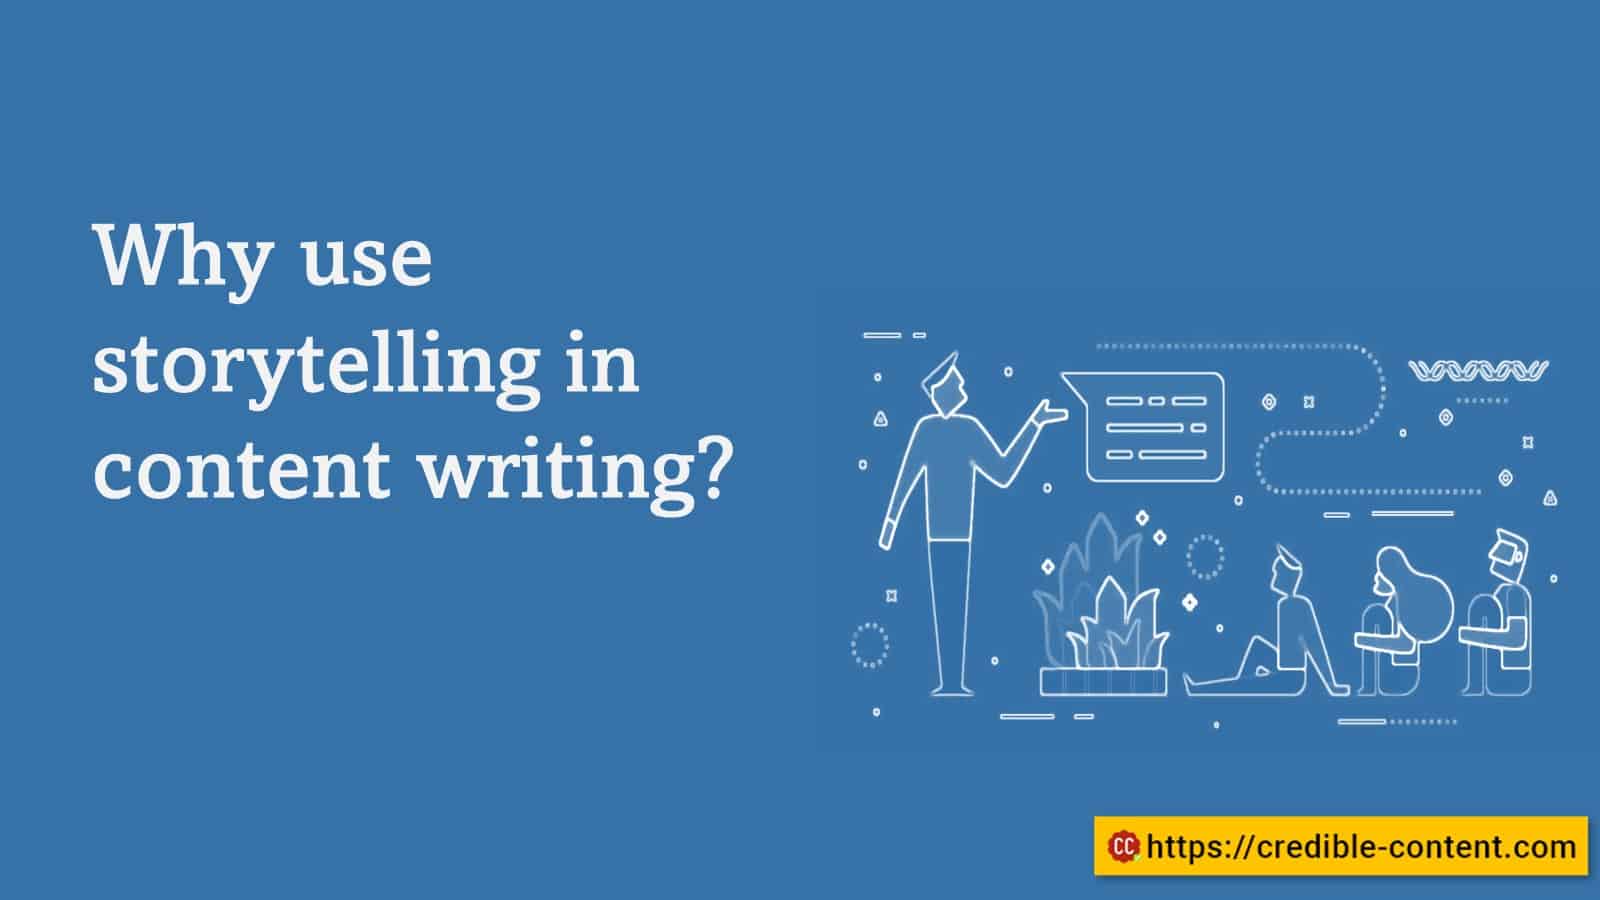 Why use storytelling in content writing